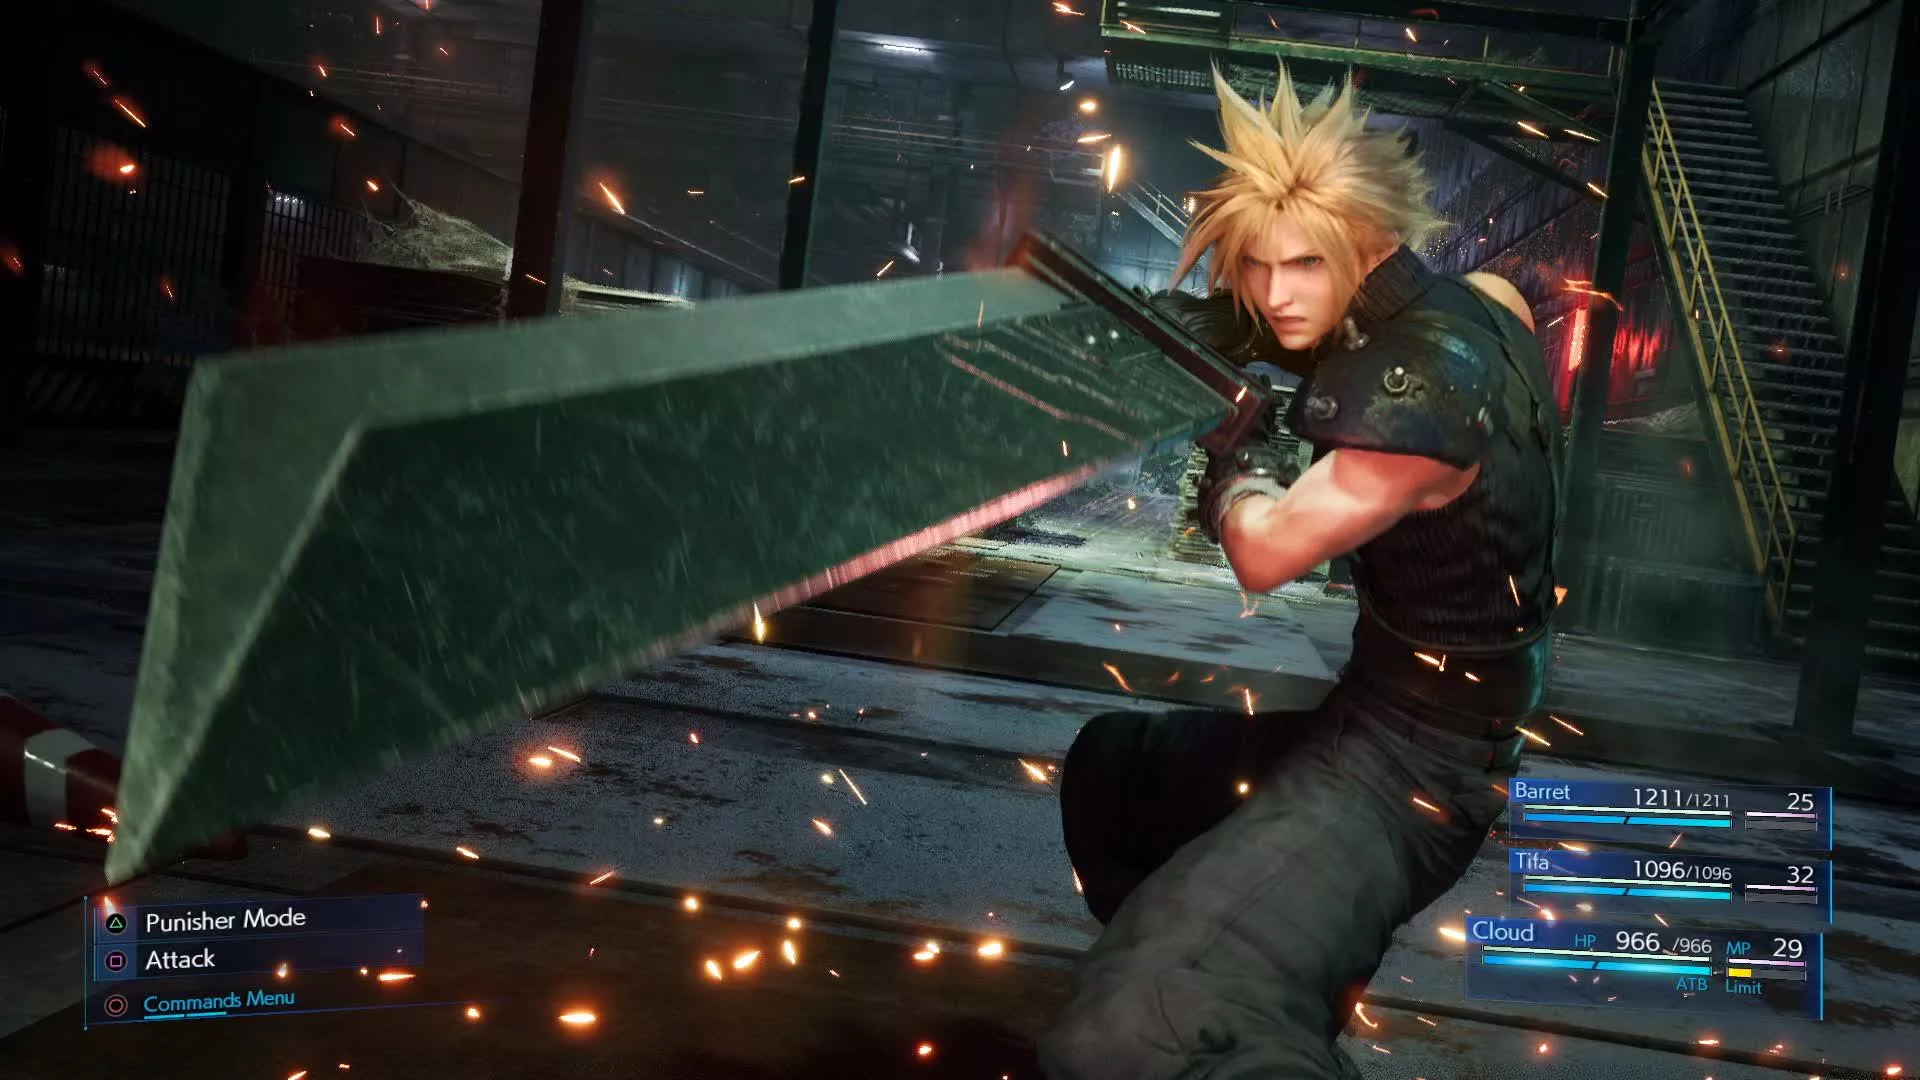 Final Fantasy VII Remake now has a game save converter, but it looks like a headache